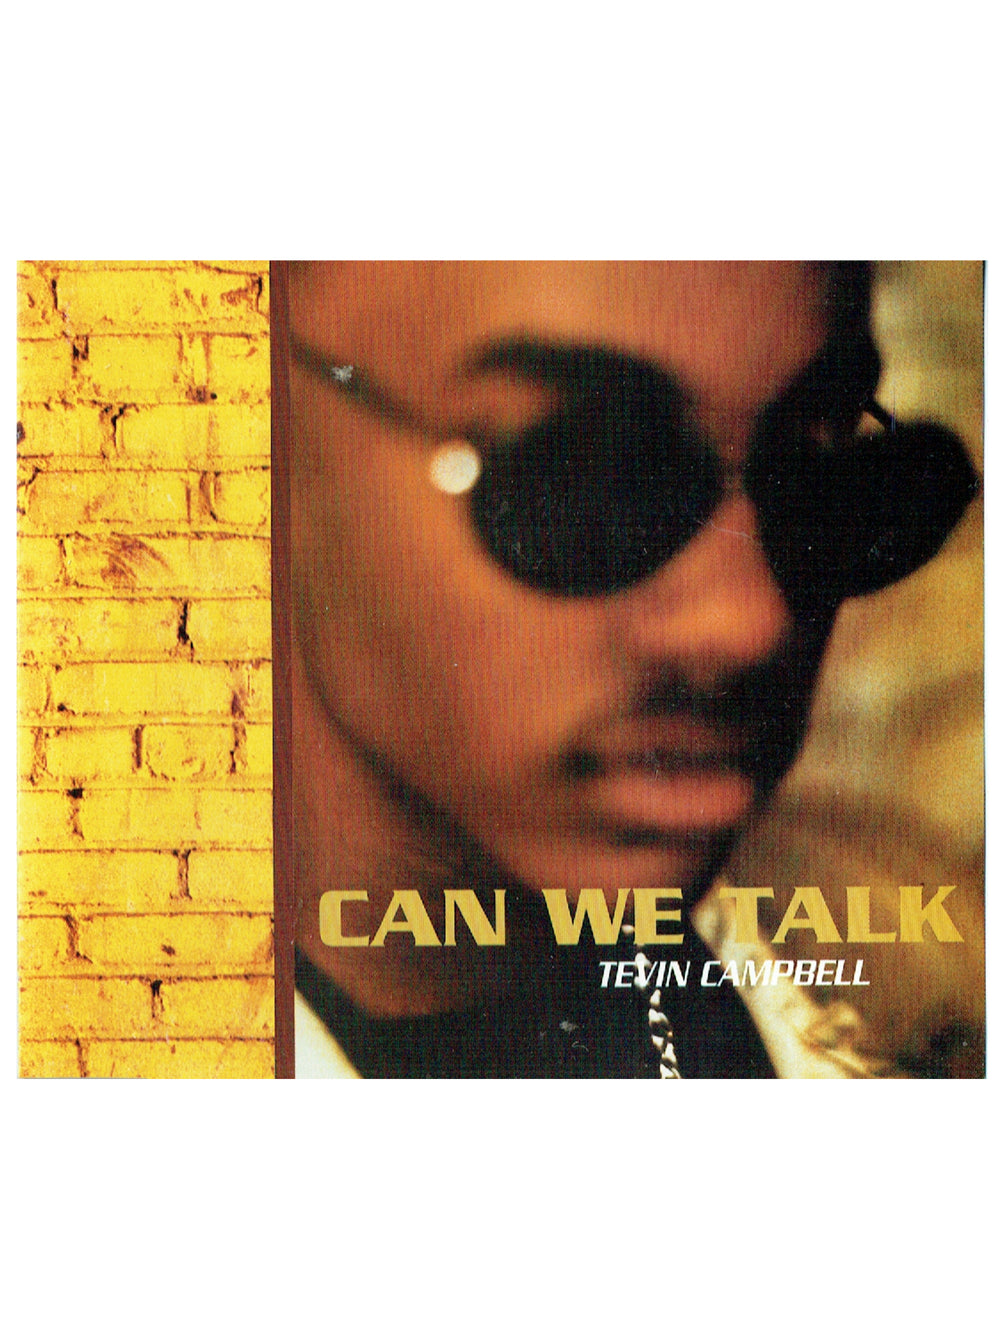 TEVIN CAMPBELL/CAN WE TALK